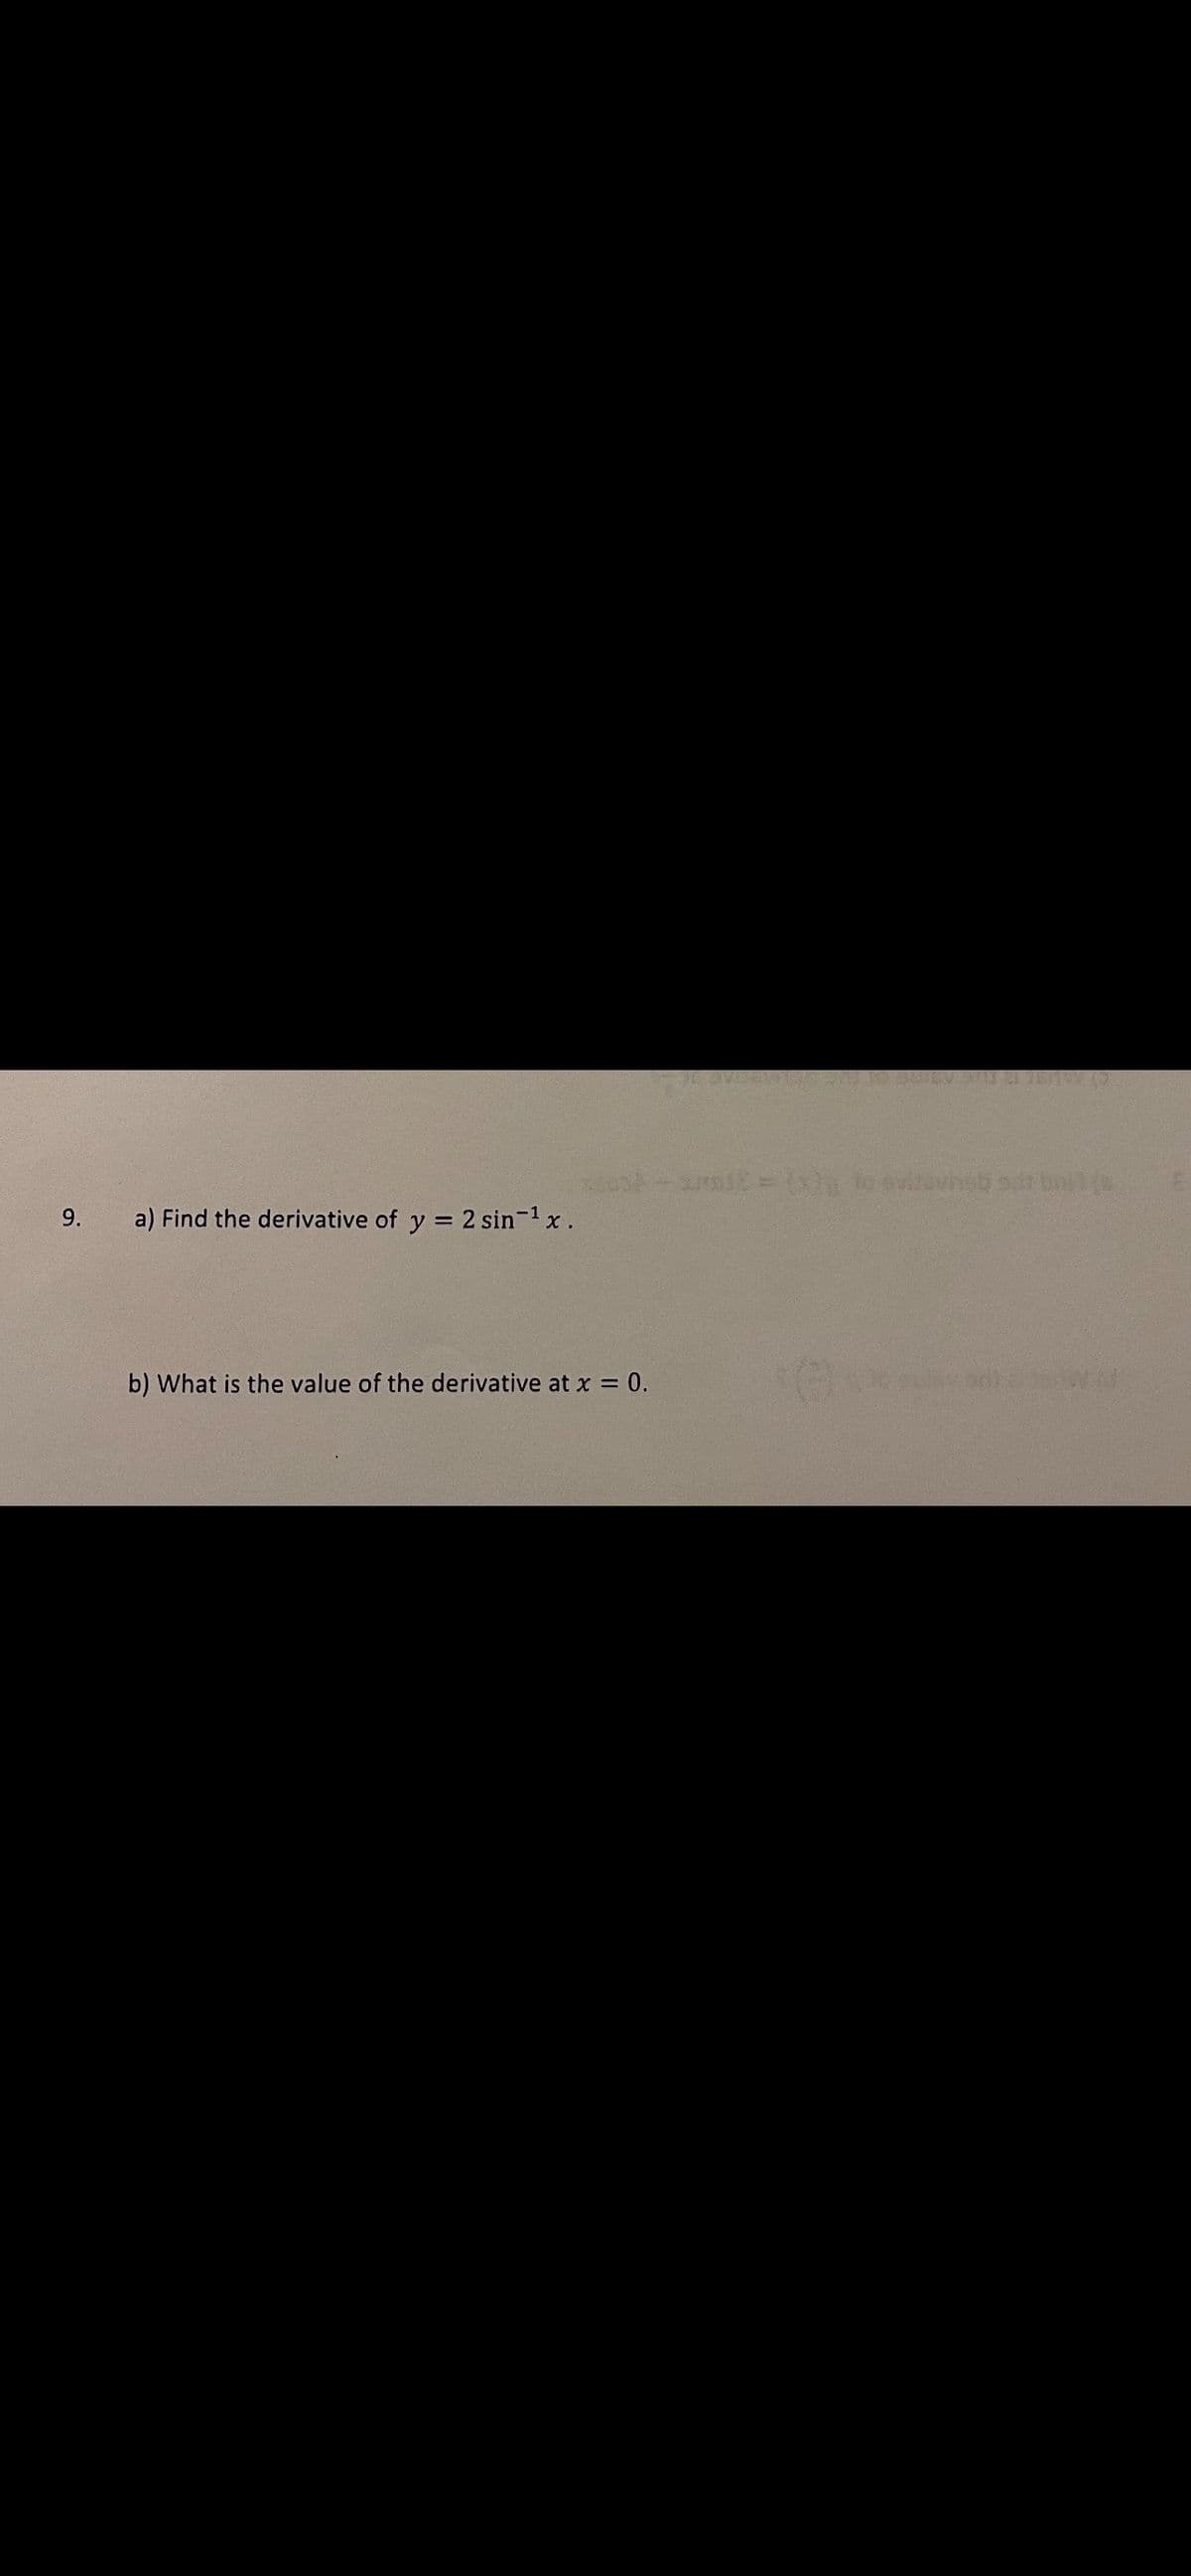 9.
a) Find the derivative of y = 2 sin-x.
b) What is the value of the derivative at x = 0.
